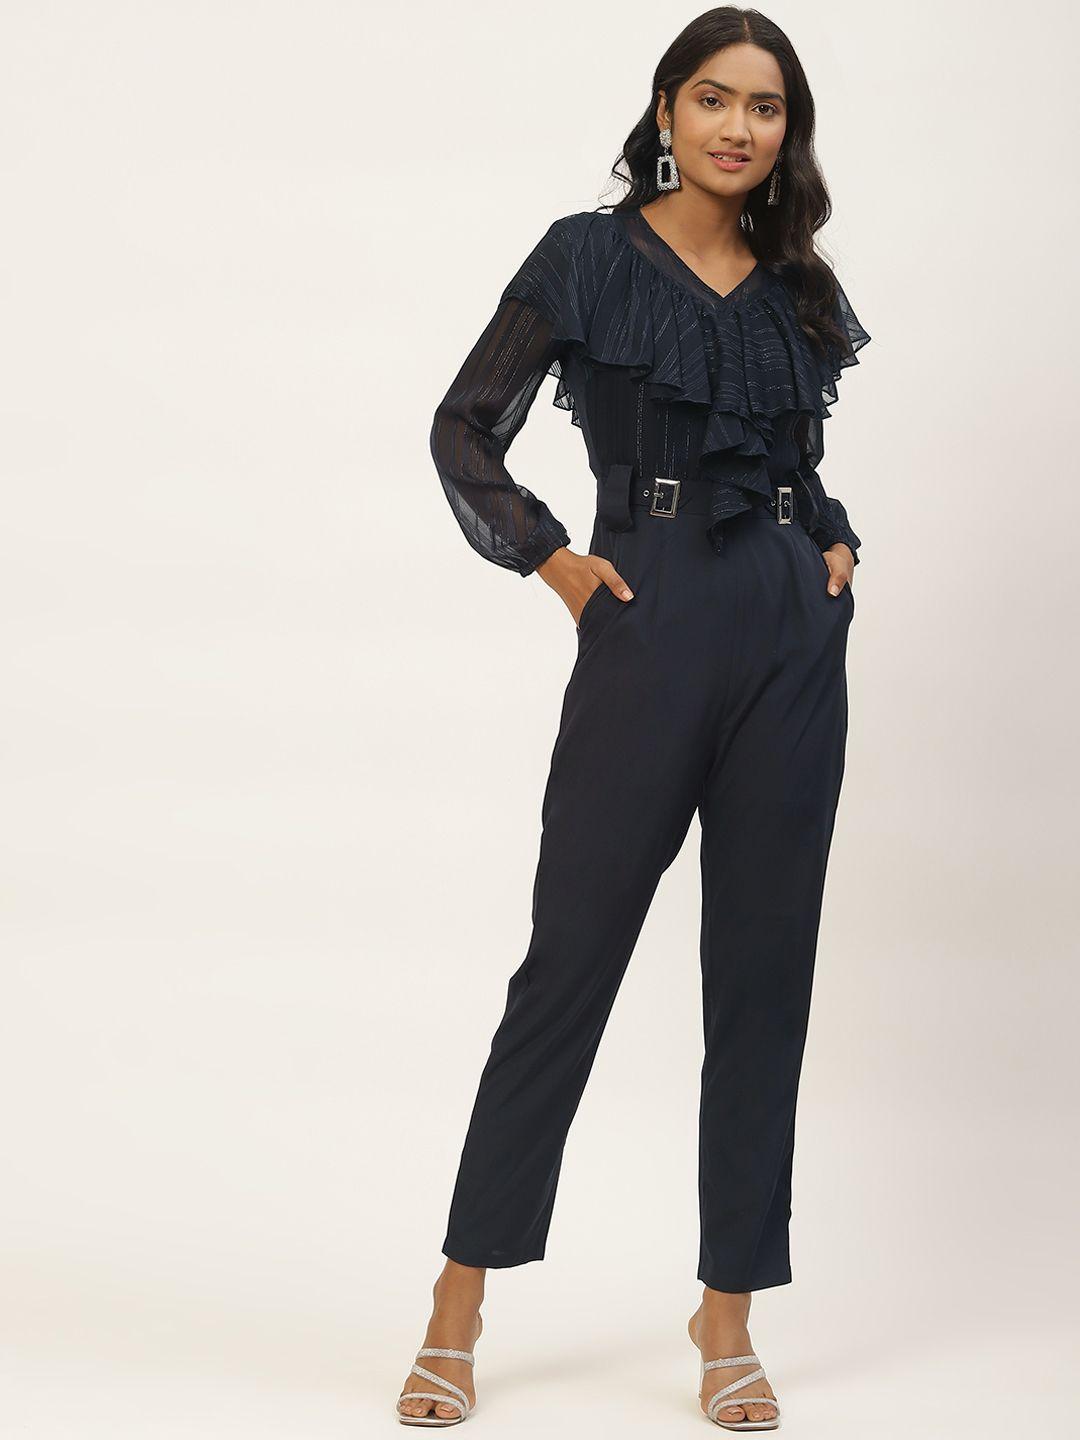 magnetic-designs-navy-blue-self-strip-basic-jumpsuit-with-ruffles-detail